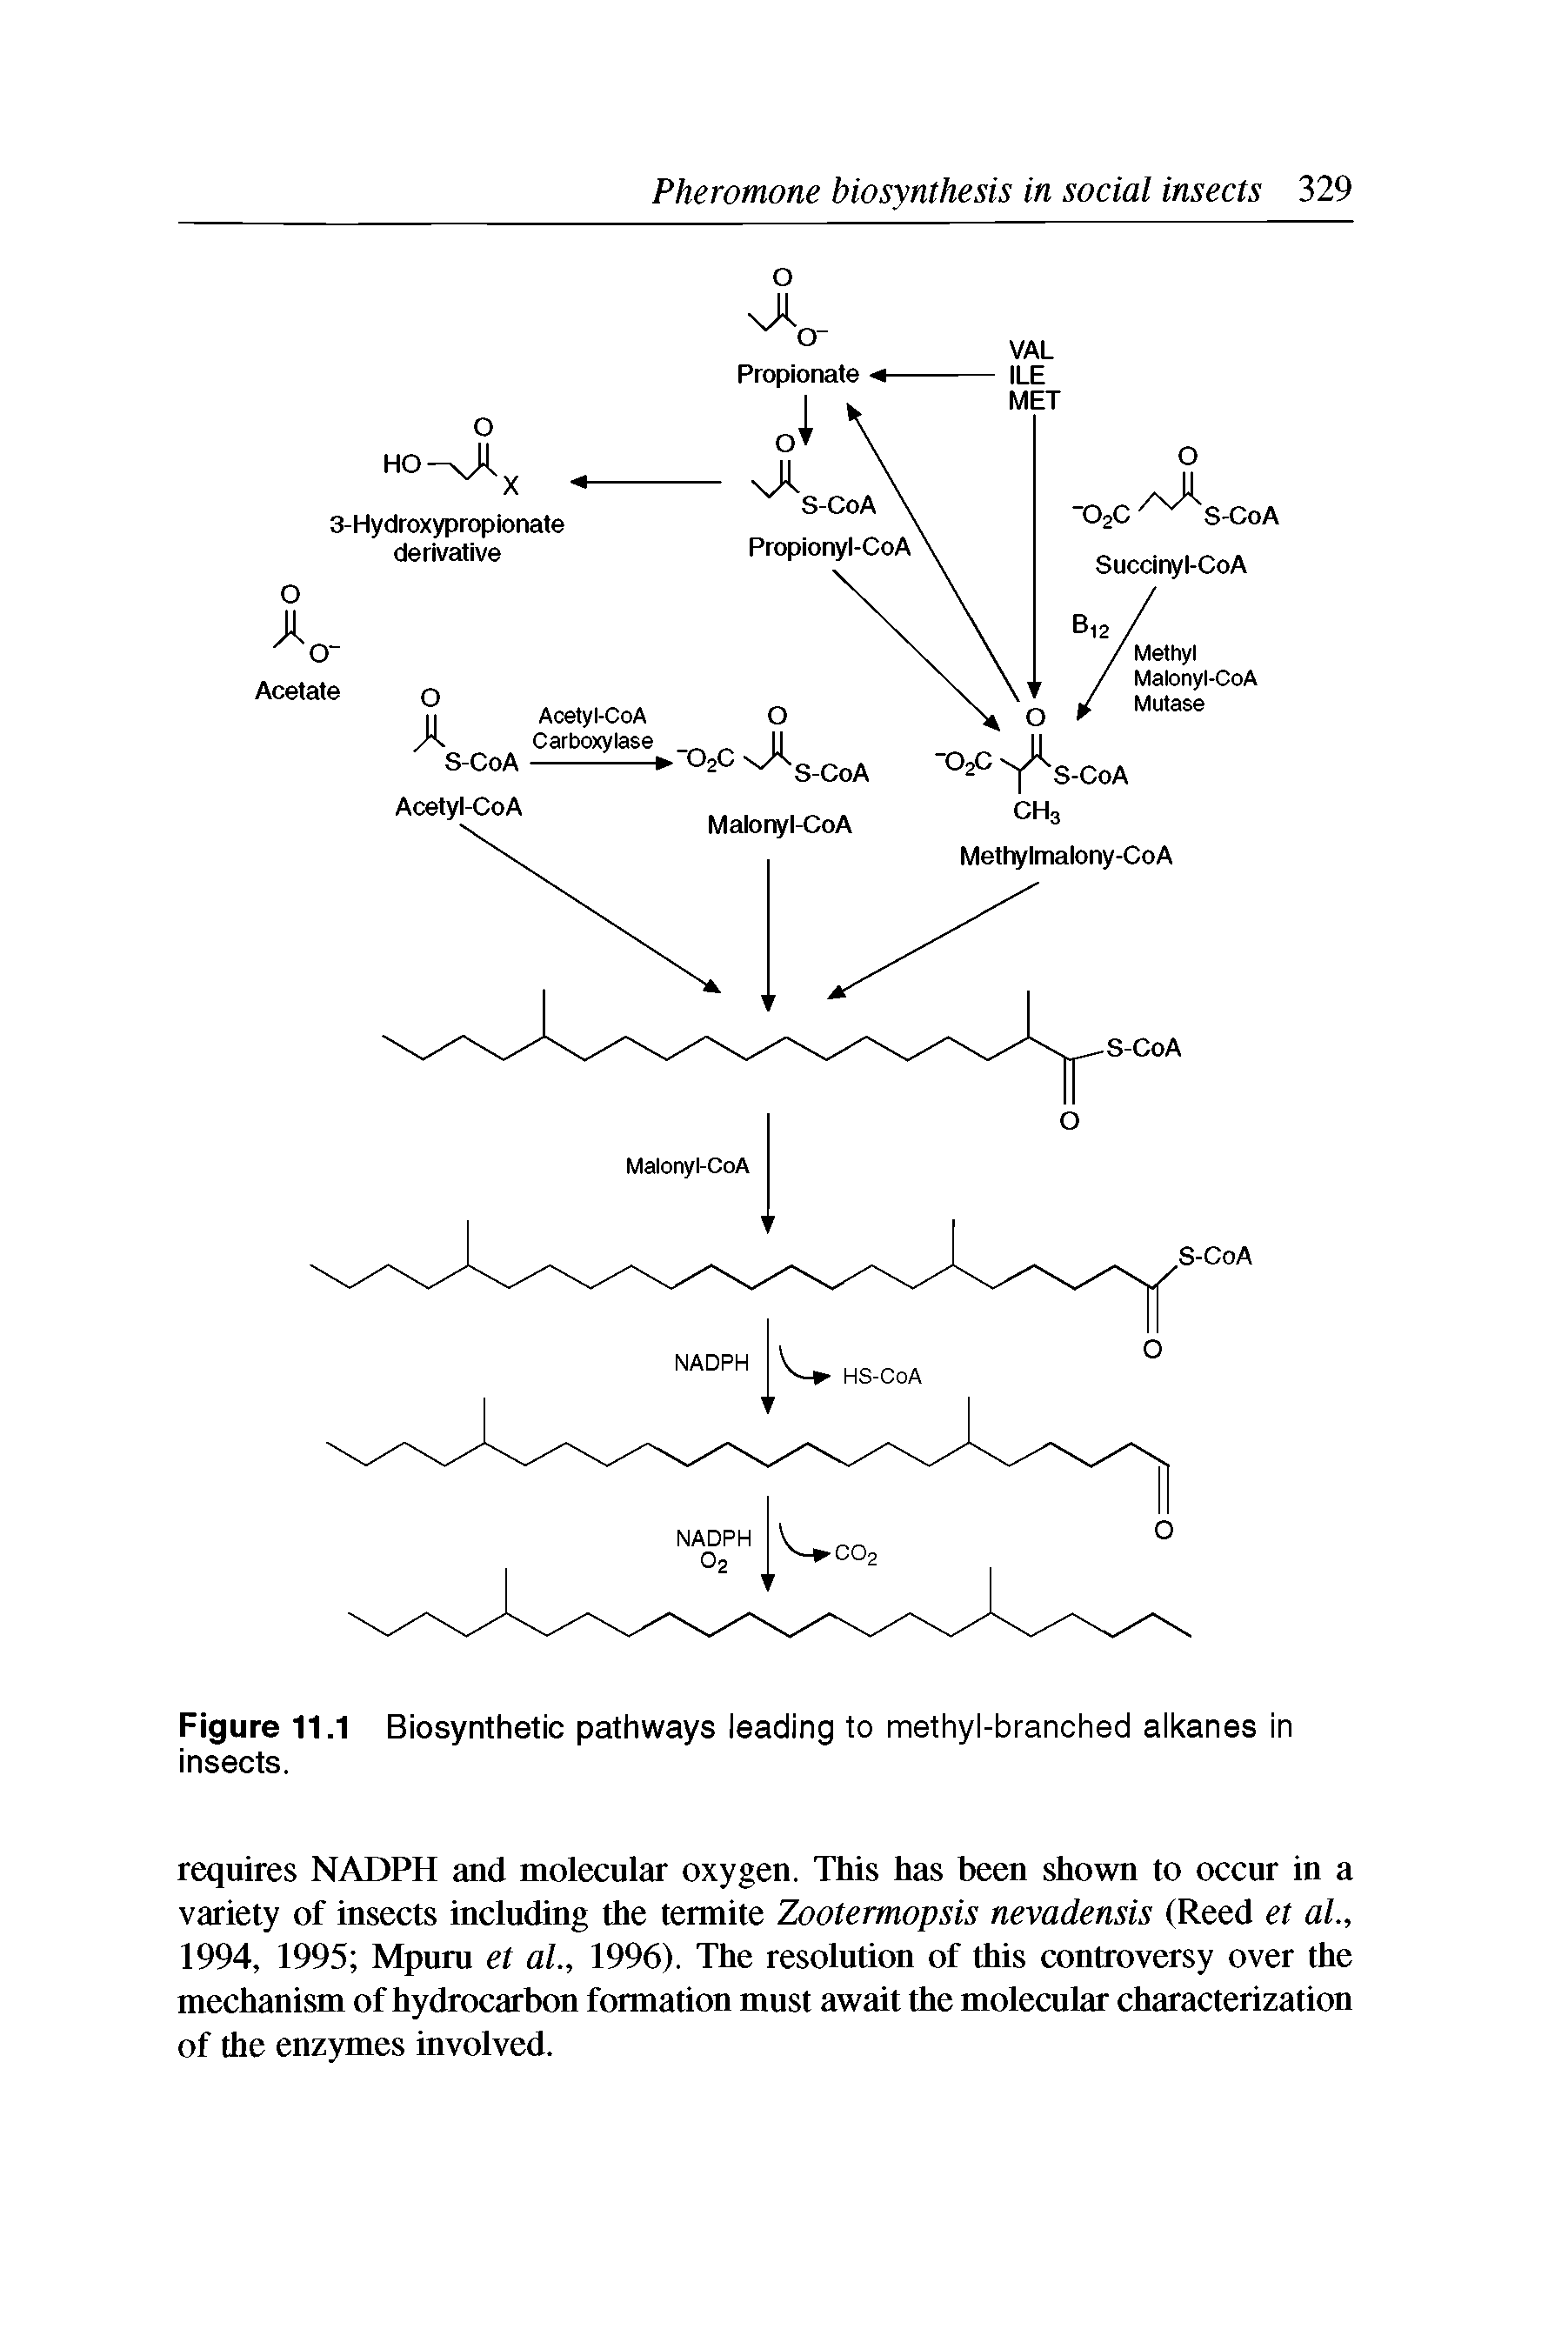 Figure 11.1 Biosynthetic pathways leading to methyl-branched alkanes in insects.